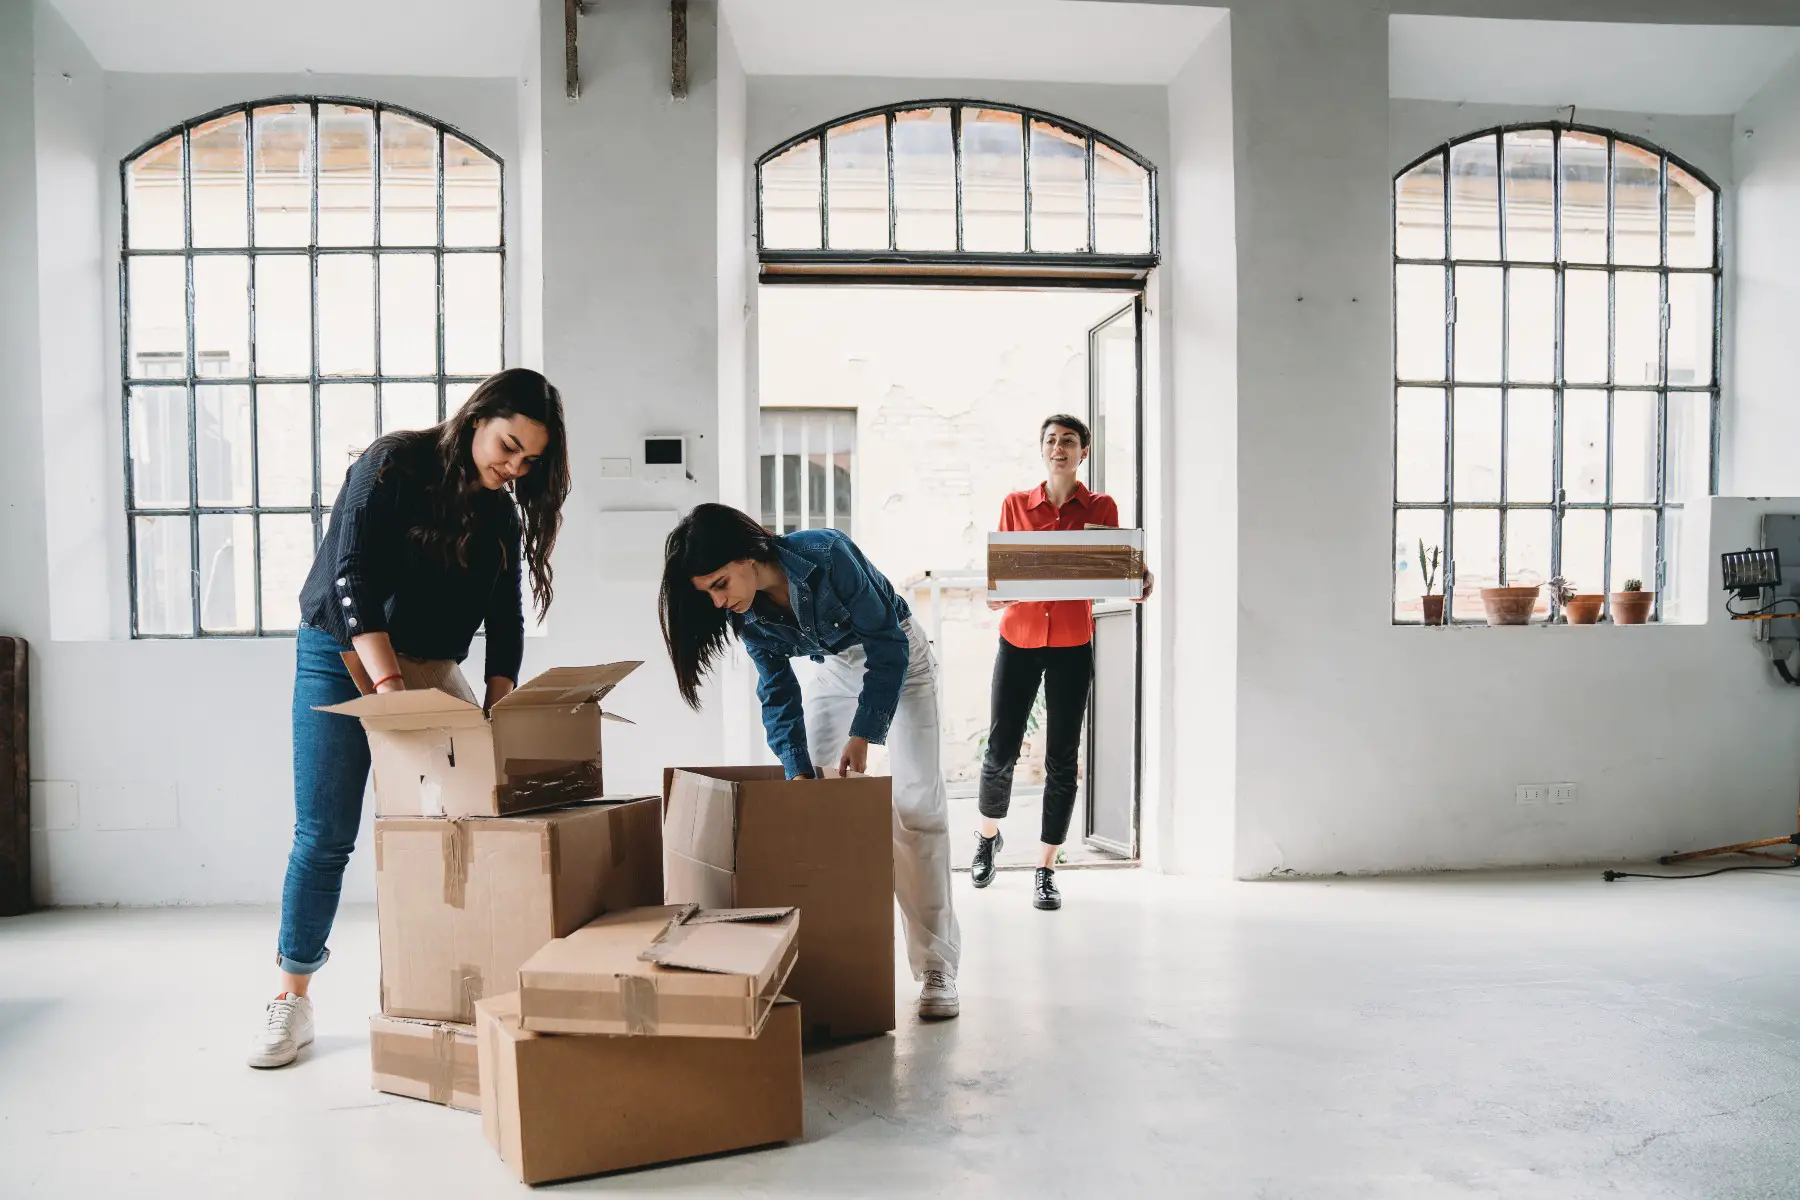 Two women are unpacking boxes in their new loft, a third one is entering the apartment carrying another box.